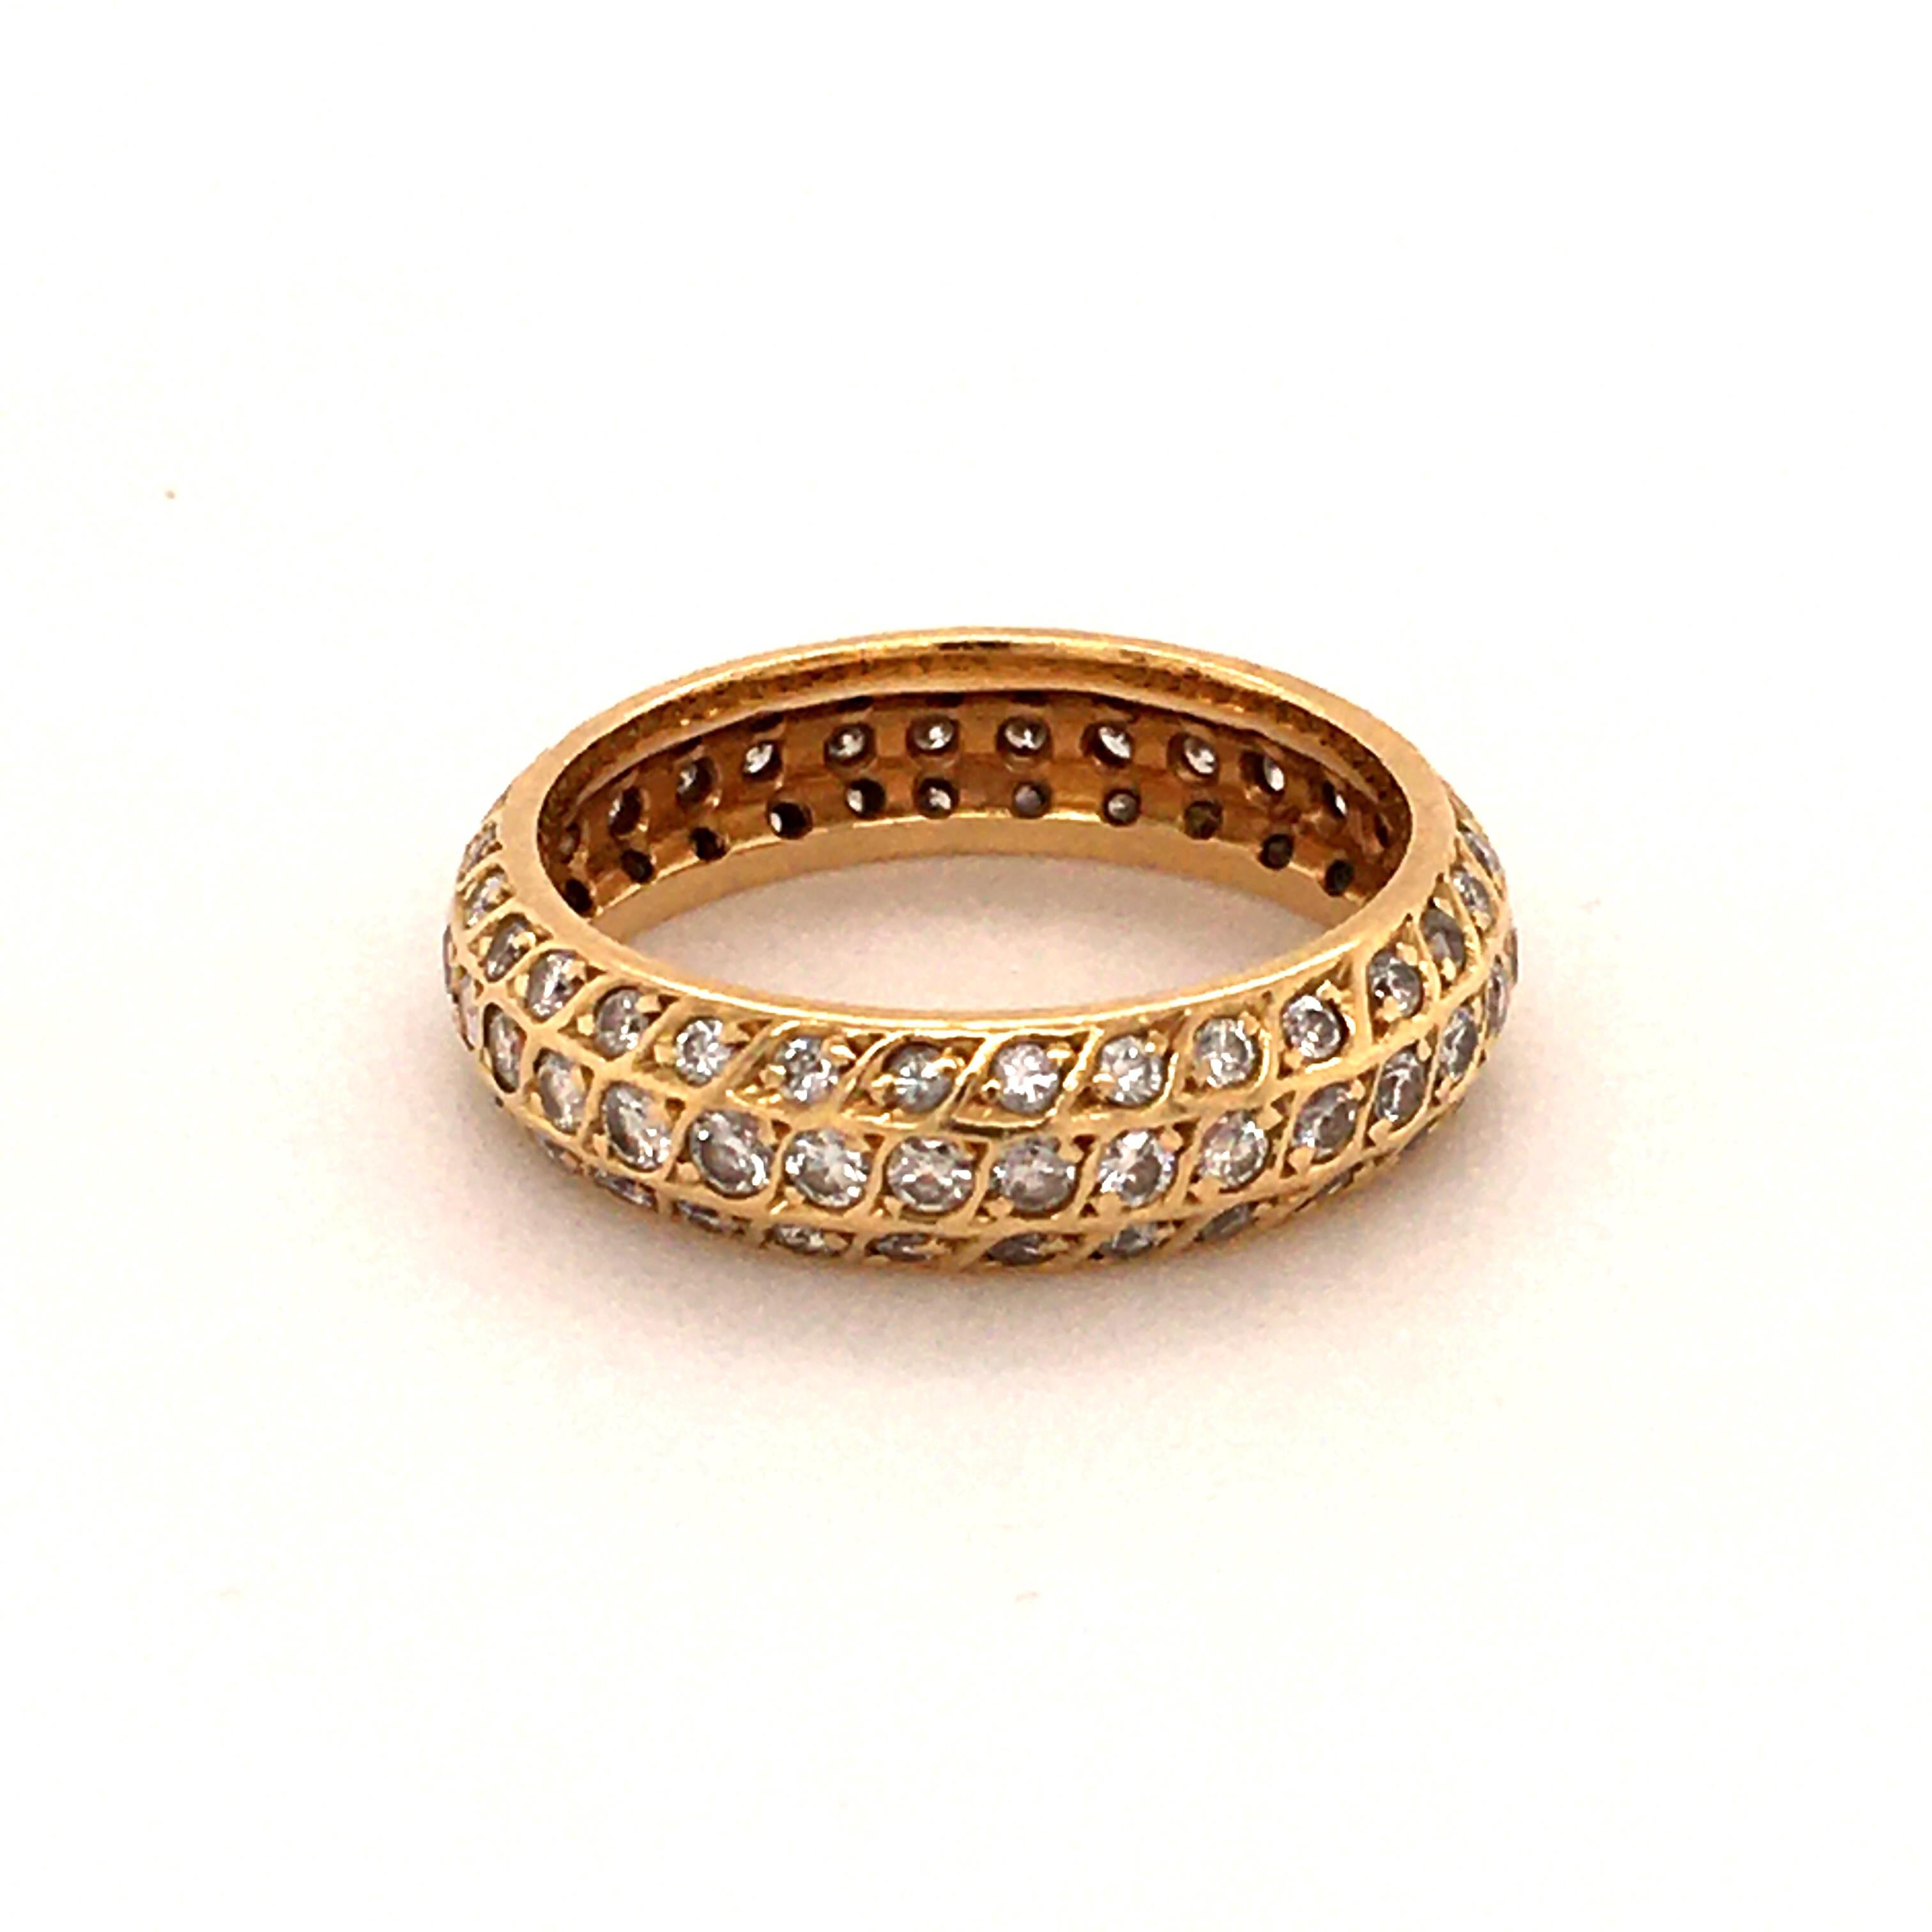 Elegant and timeless eternity ring in 18 karat yellow gold. Set with 95 brilliant-cut diamonds of G/H colour and si/i clarity. Arranged in three rows and delicately set in leave-shaped mountings.

Ring size: 54 (EU) / 7 (US)